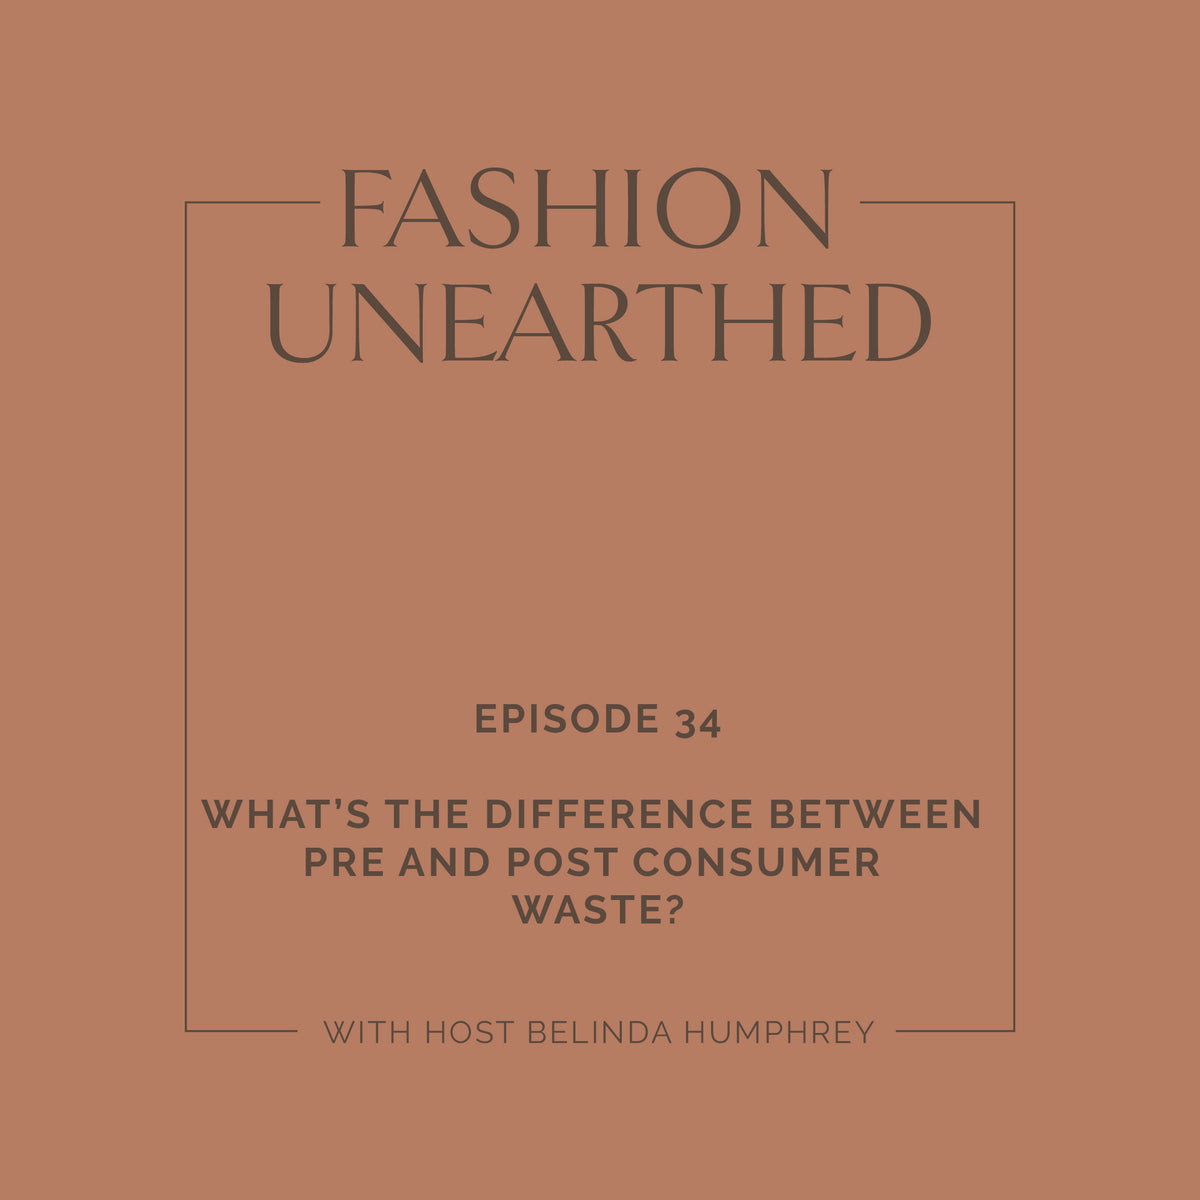 EPISODE 34: What's the difference between pre and post consumer waste?